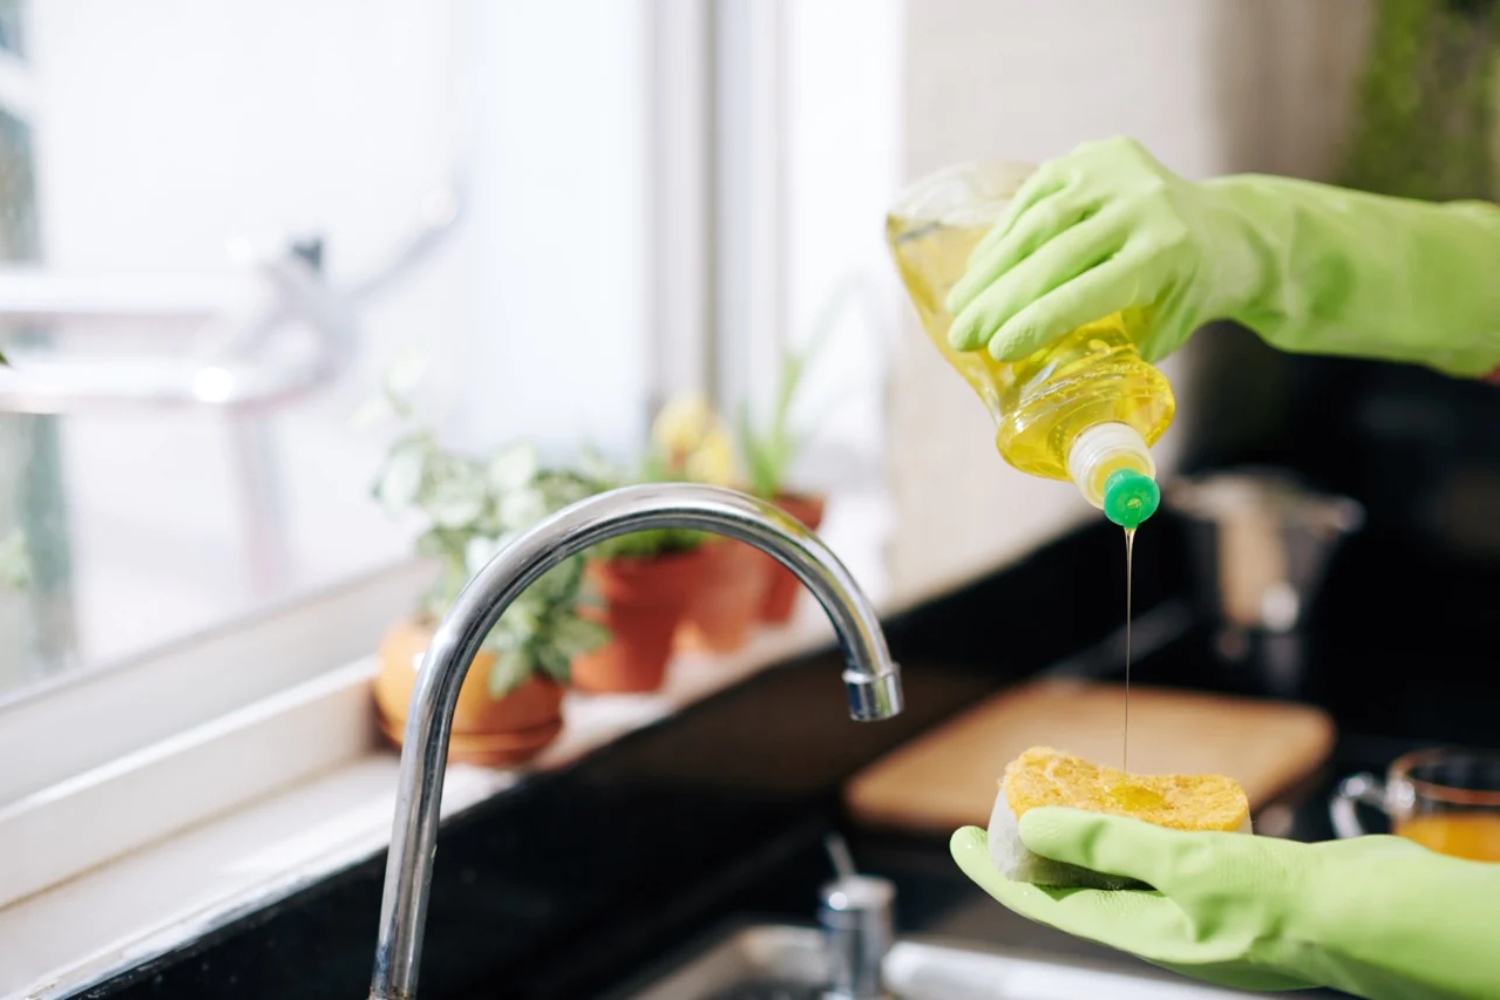 Pouring washing up liquid on a cleaning sponge